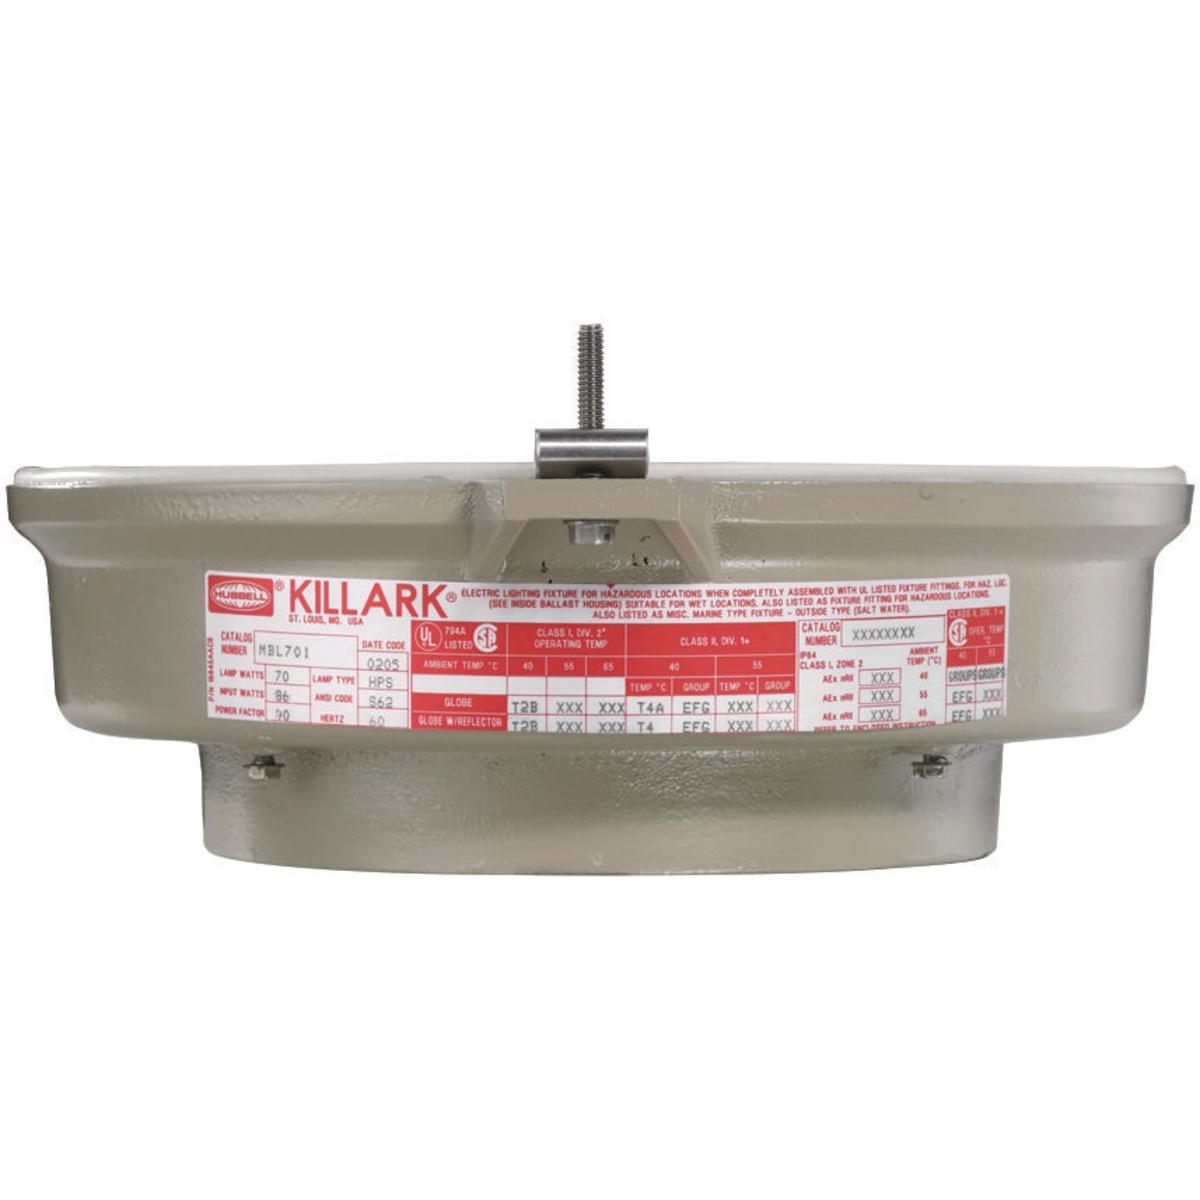 Hubbell VM2H070 VM2 Series - 70W Metal Halide Quadri-Volt - Housing  ; The VM2 Series is a low profile, low bay HID luminaire. The design of the VM2 makes it suitable for harsh and hazardous environments using a cast copper-free aluminum housing and mount. Its low profil